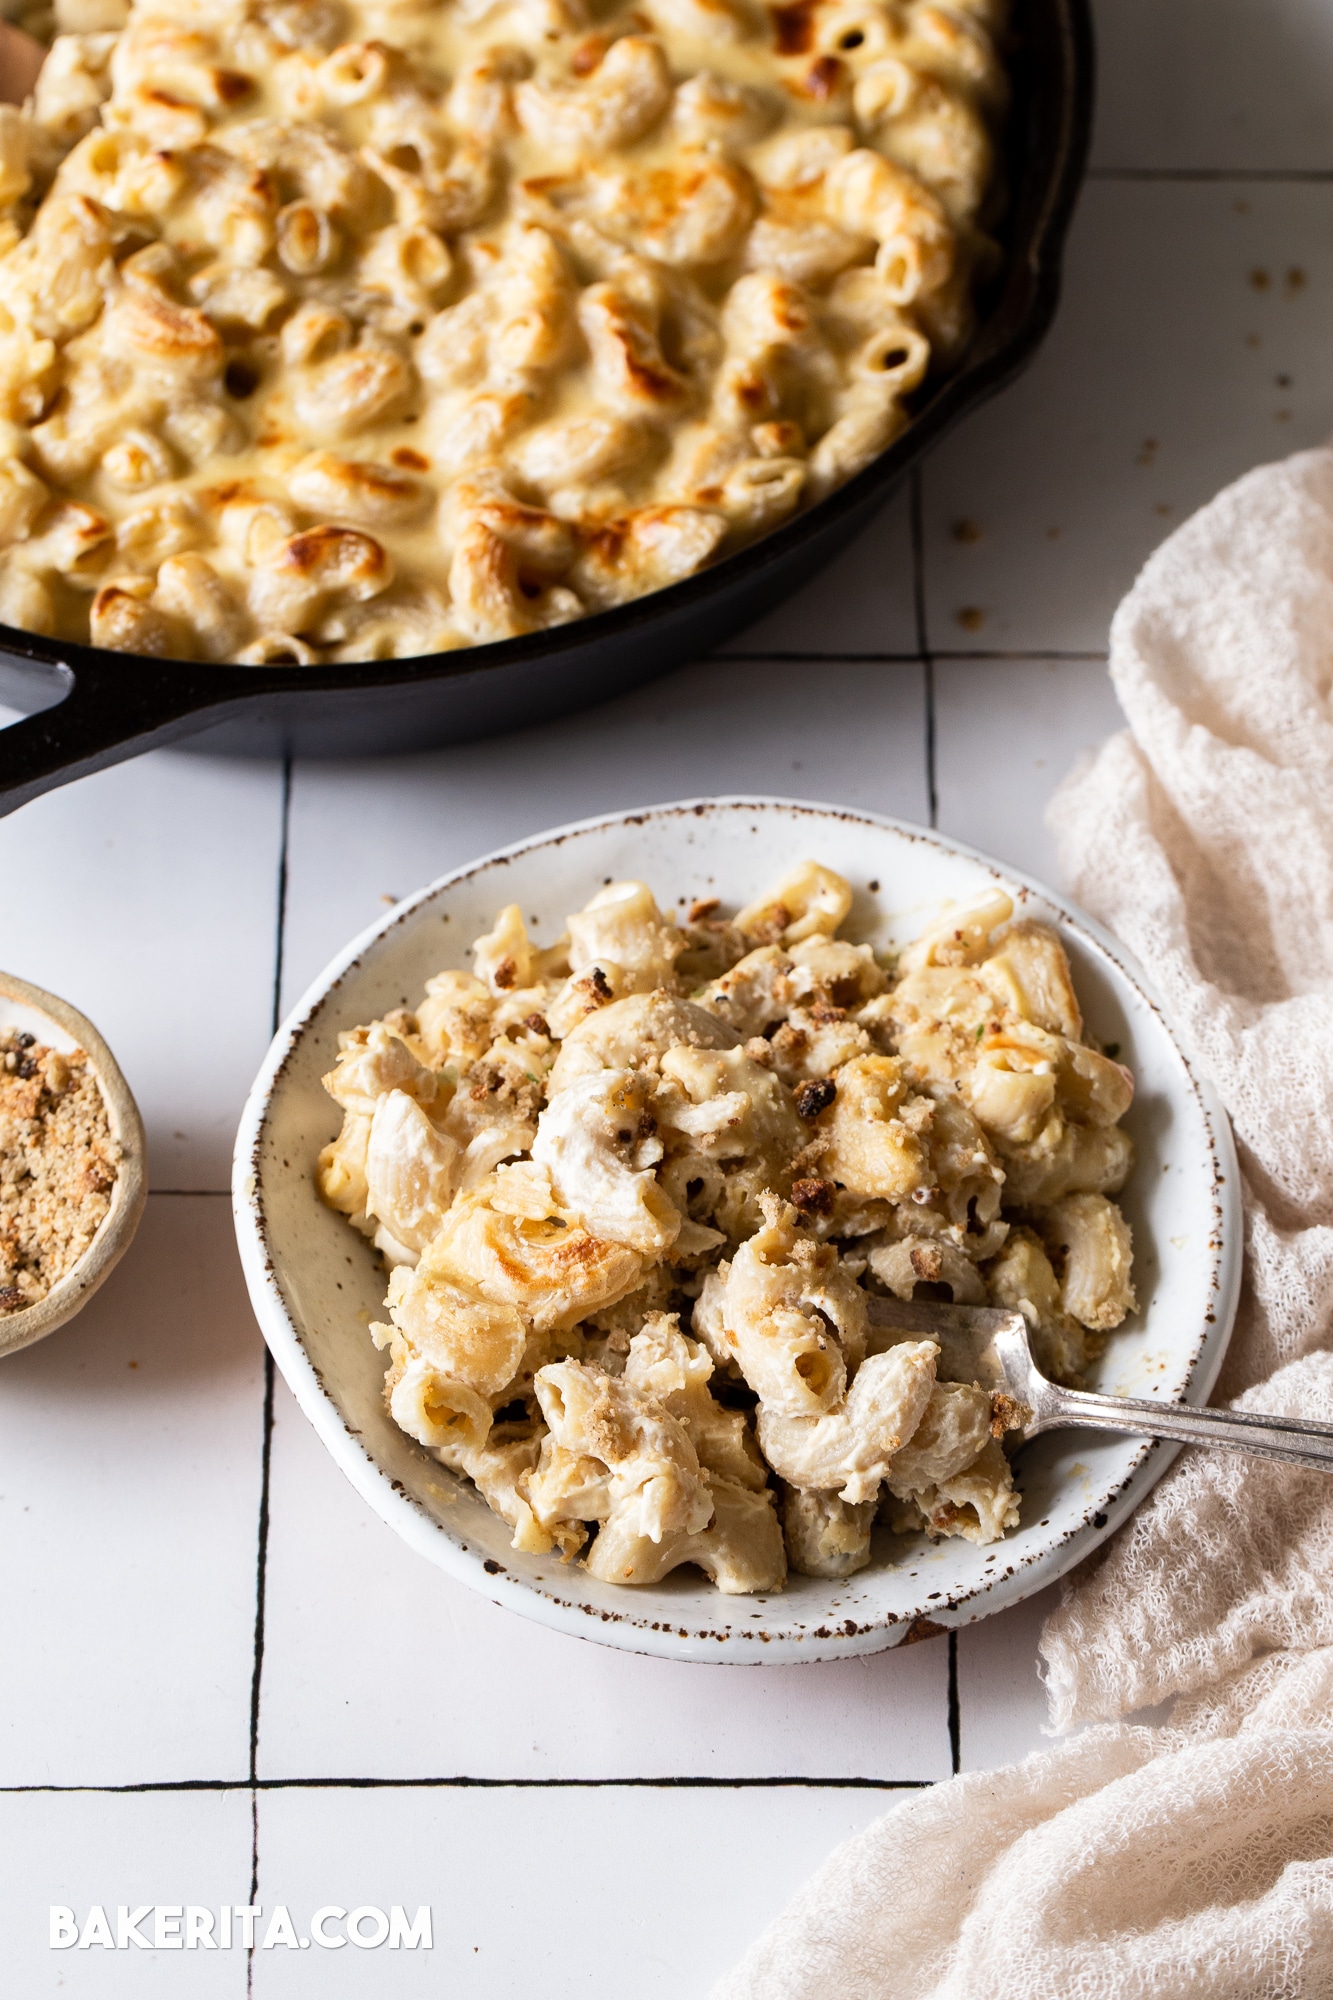 Simple and quick to make, this Easy Vegan Mac and Cheese recipe will satisfy even the pickiest of eaters! It's made with just 8 whole ingredients - no processed vegan cheeses here. This recipe comes together quickly for an easy dinner and is easily made gluten-free. 